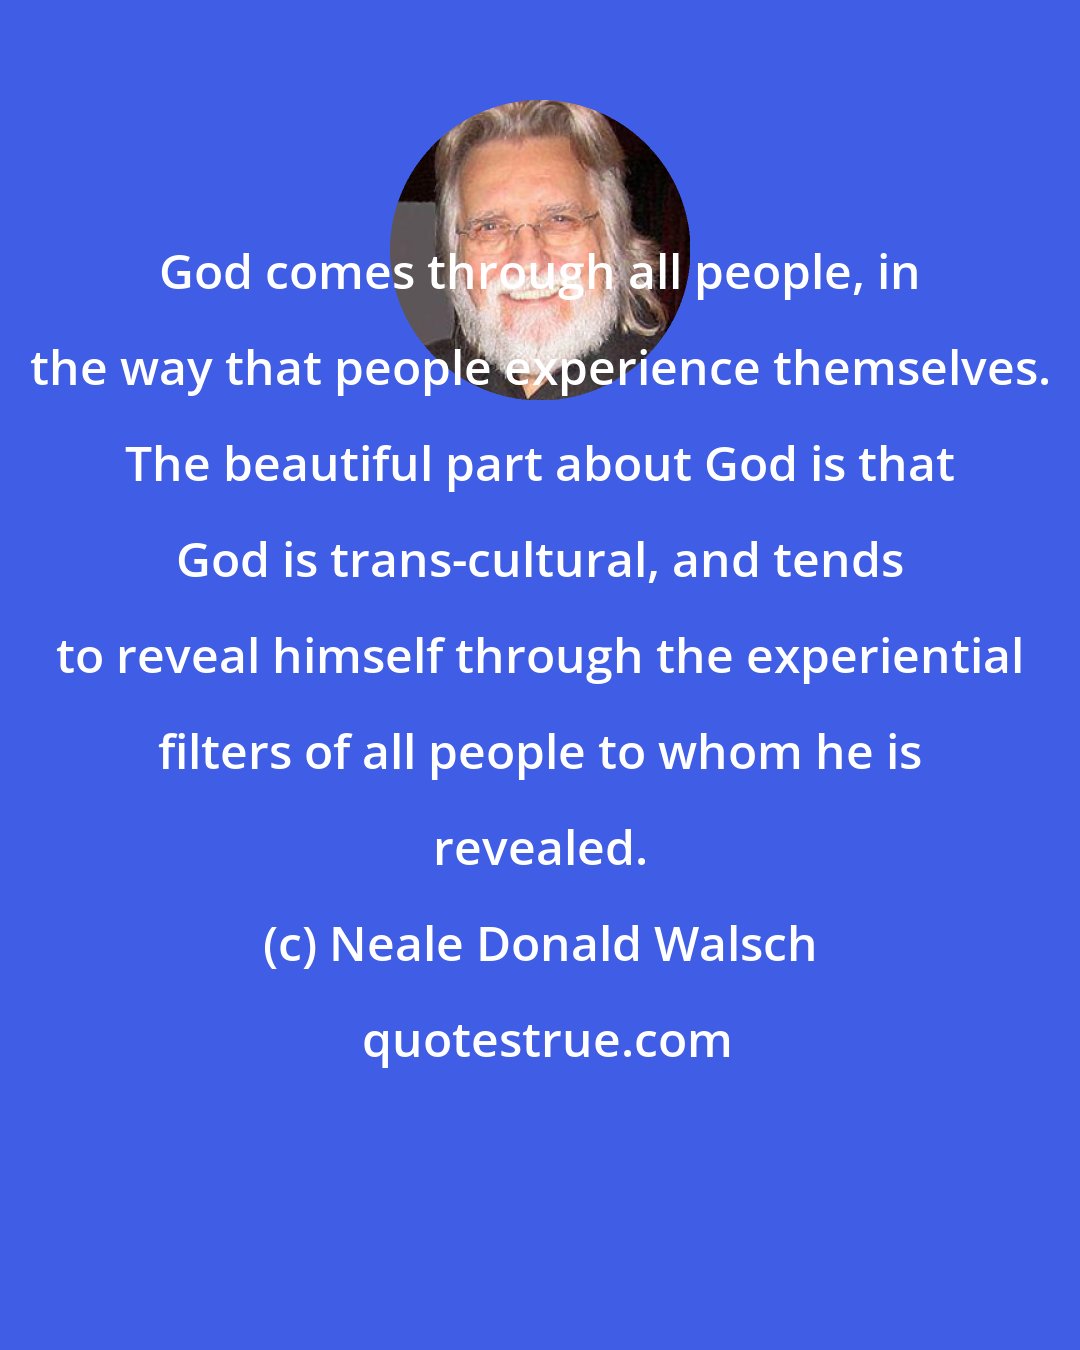 Neale Donald Walsch: God comes through all people, in the way that people experience themselves. The beautiful part about God is that God is trans-cultural, and tends to reveal himself through the experiential filters of all people to whom he is revealed.